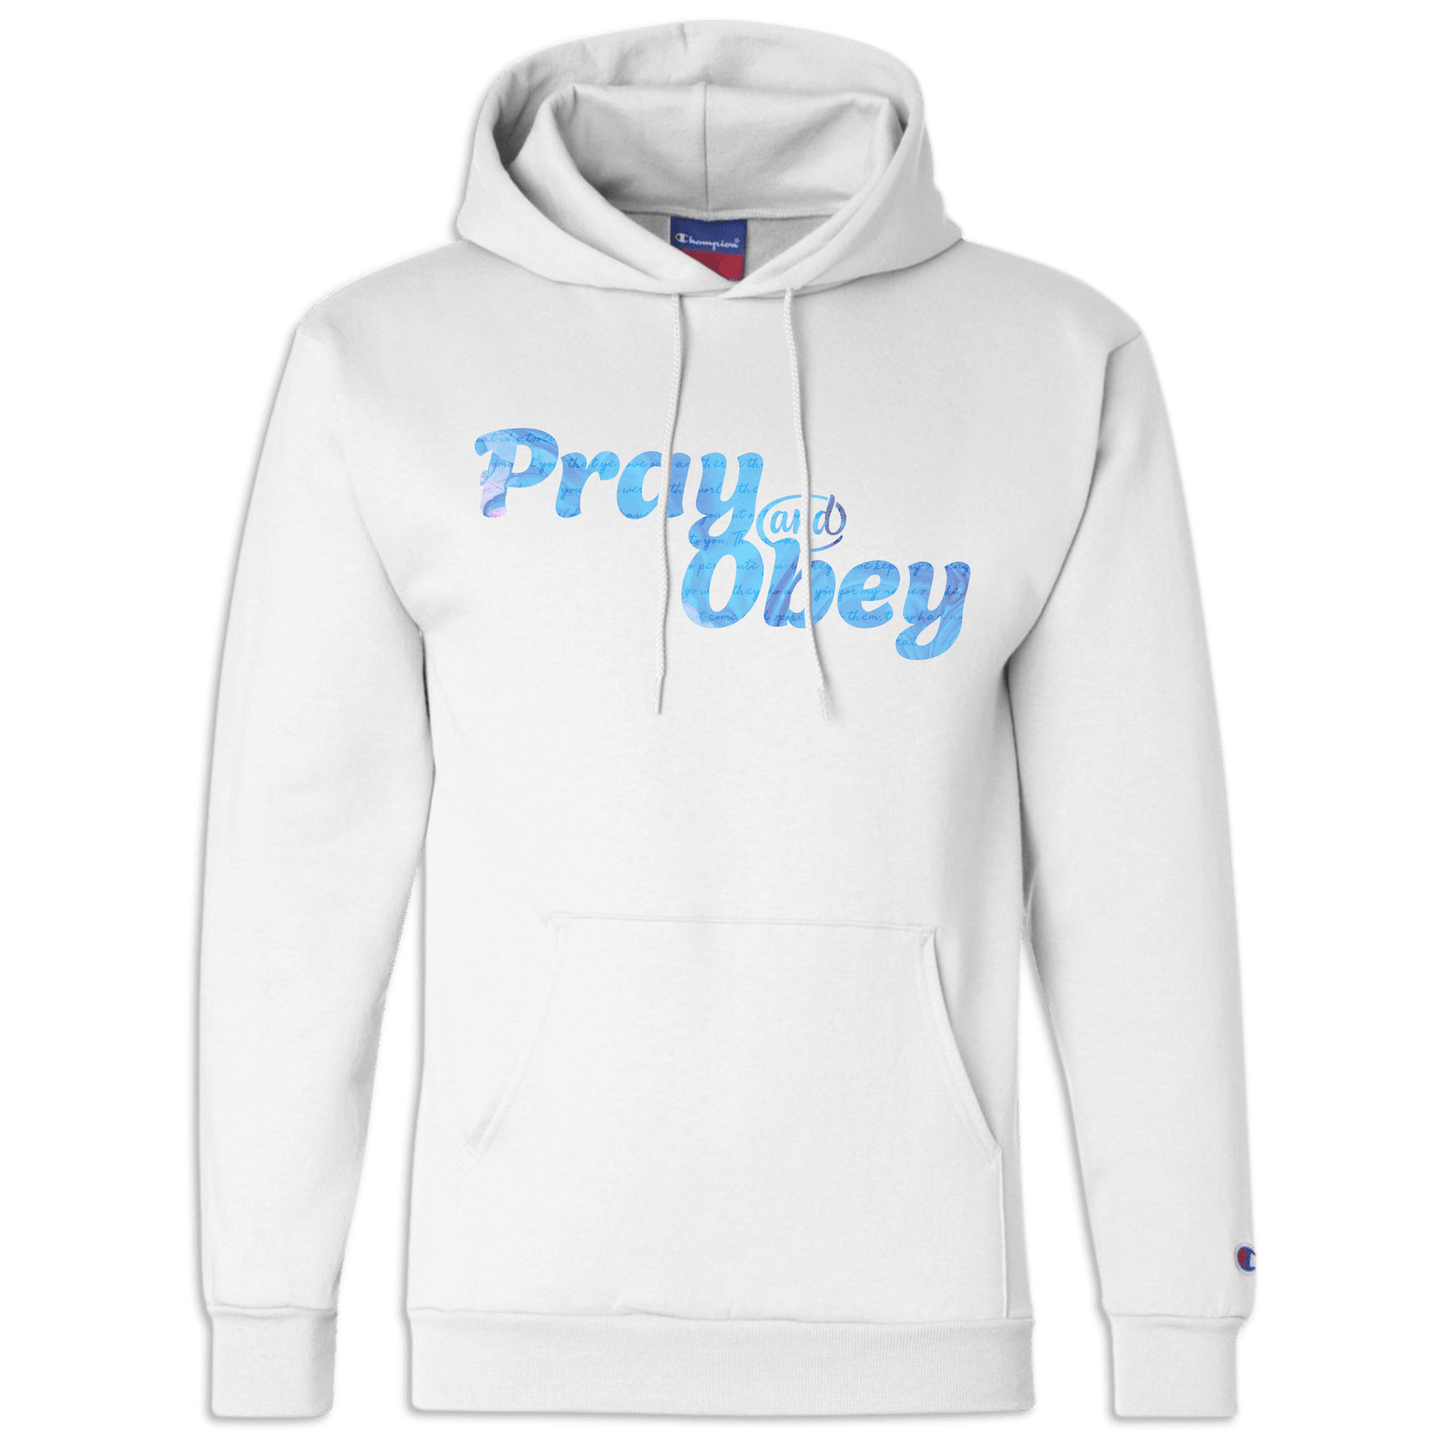 Pray and Obey Hoodie